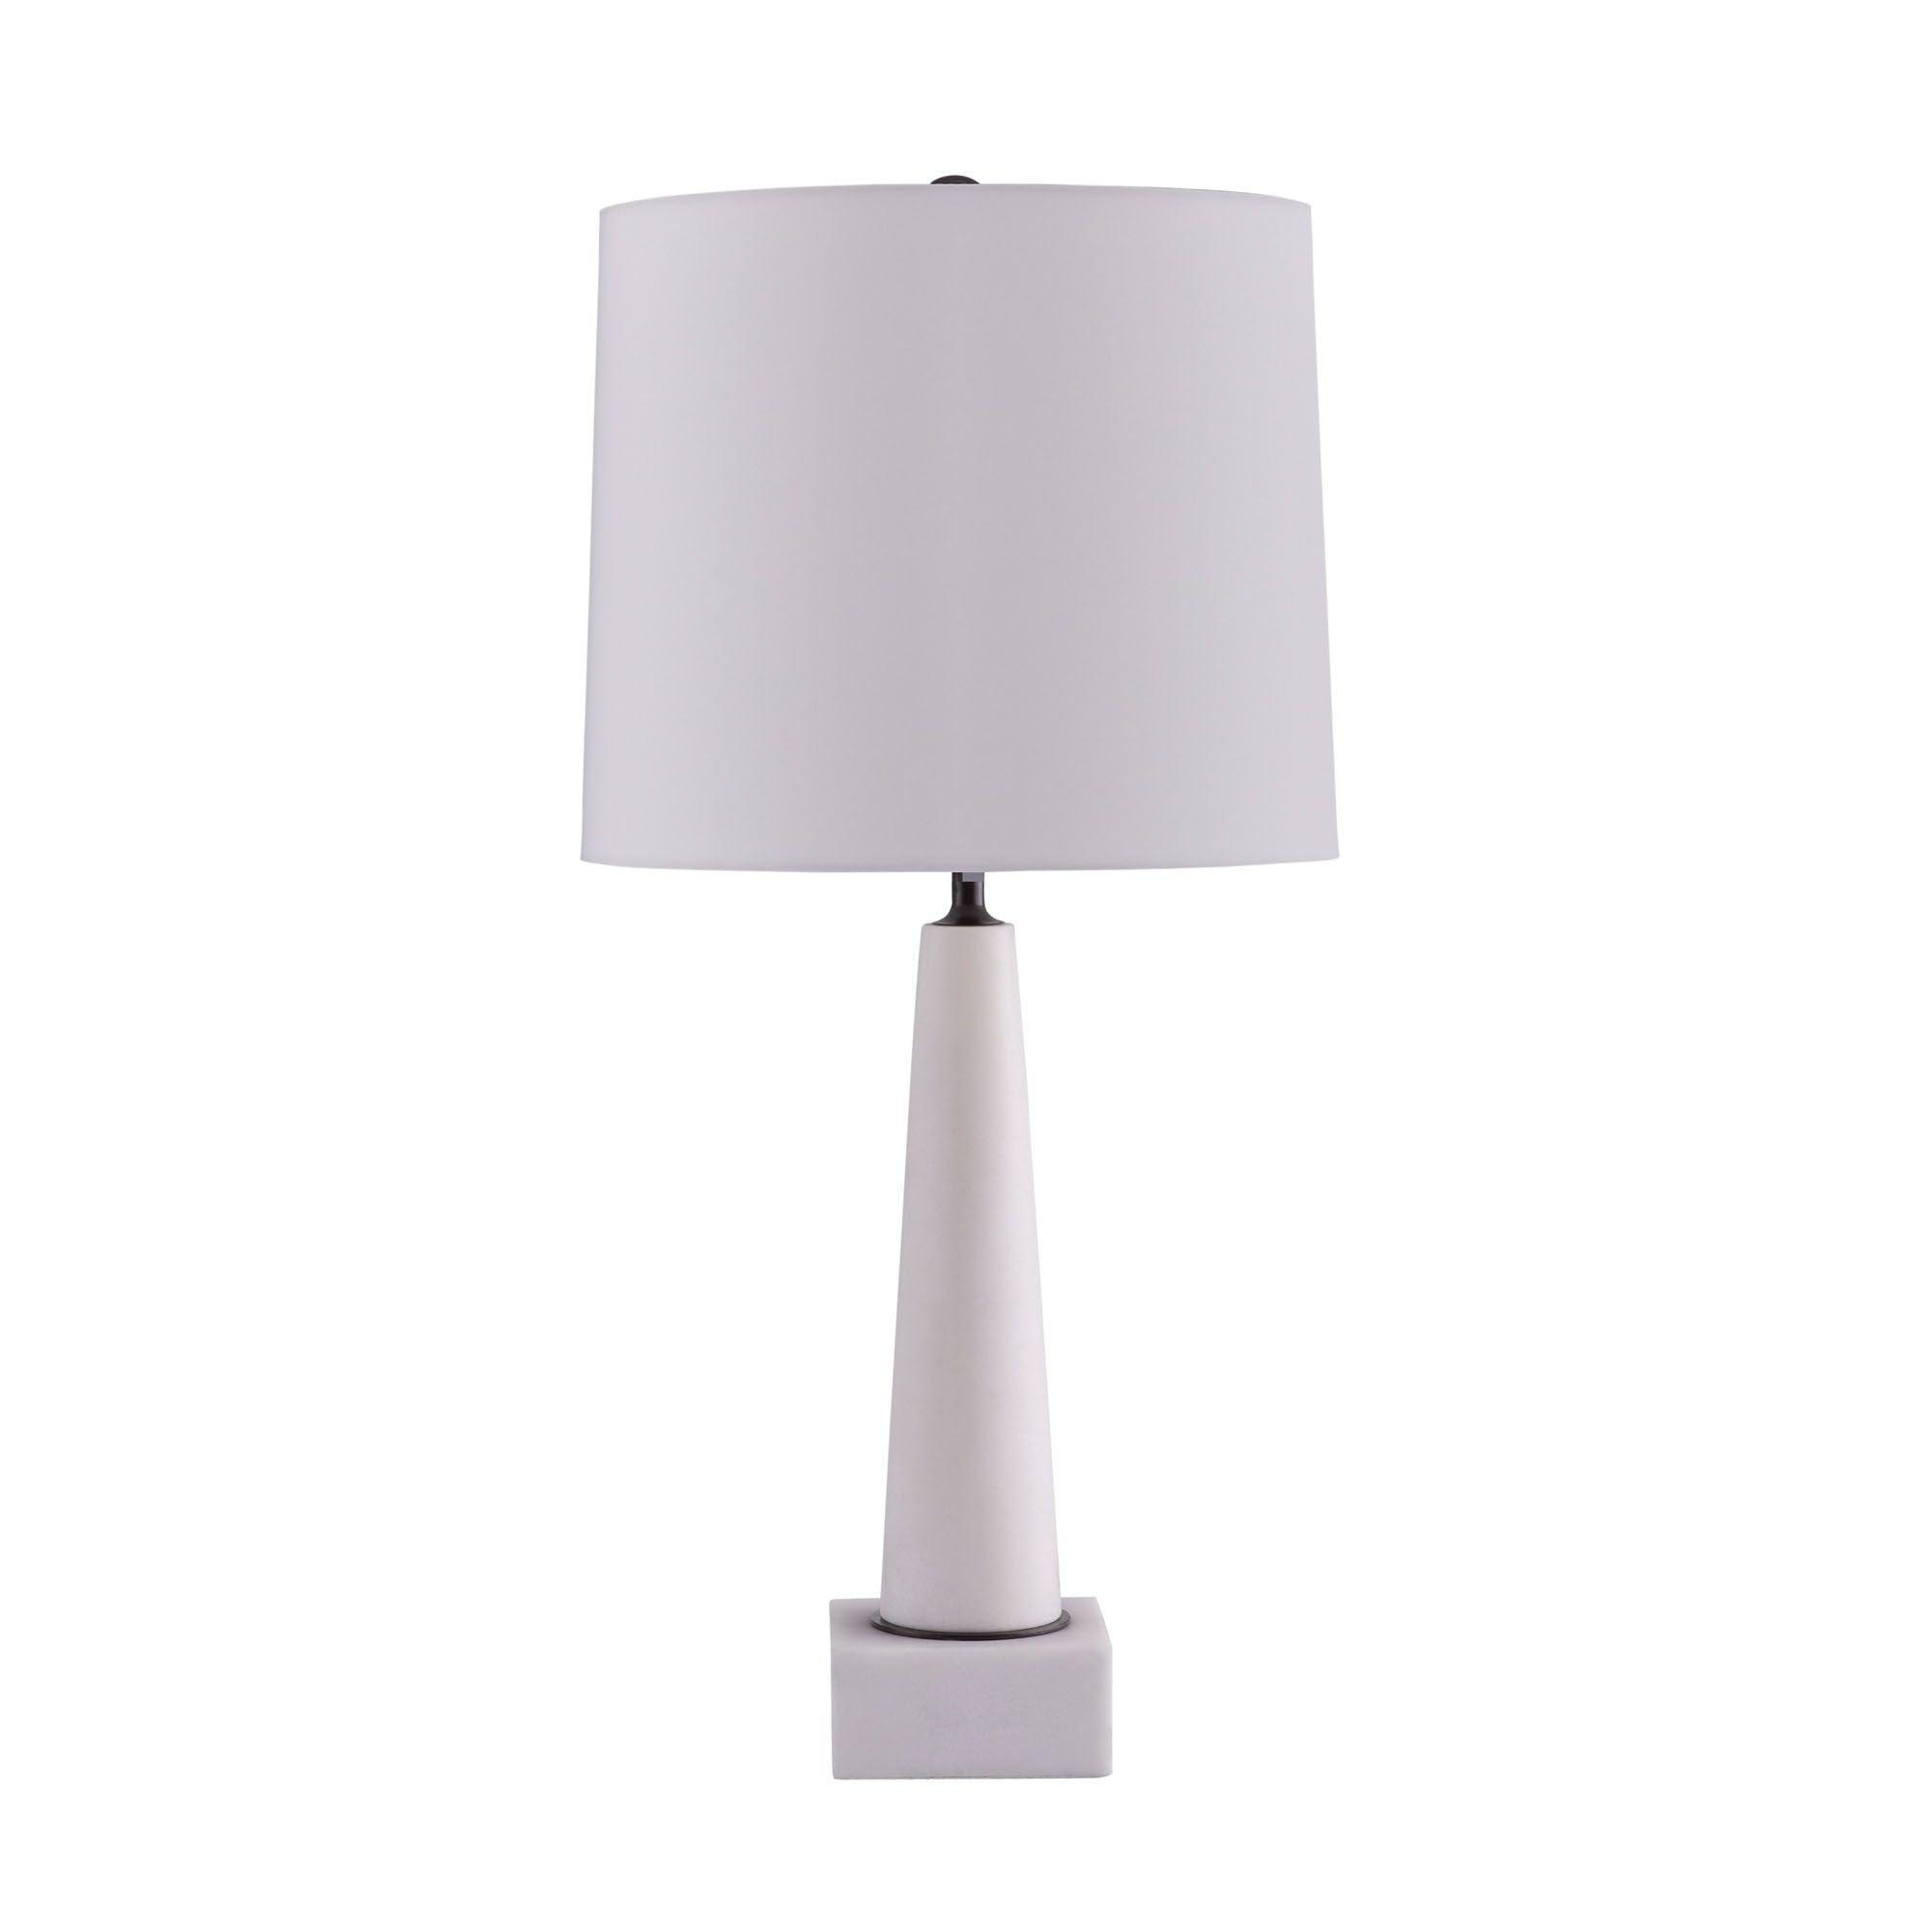 Arteriors - Marques Table Lamp - 49855-602 | Montreal Lighting & Hardware